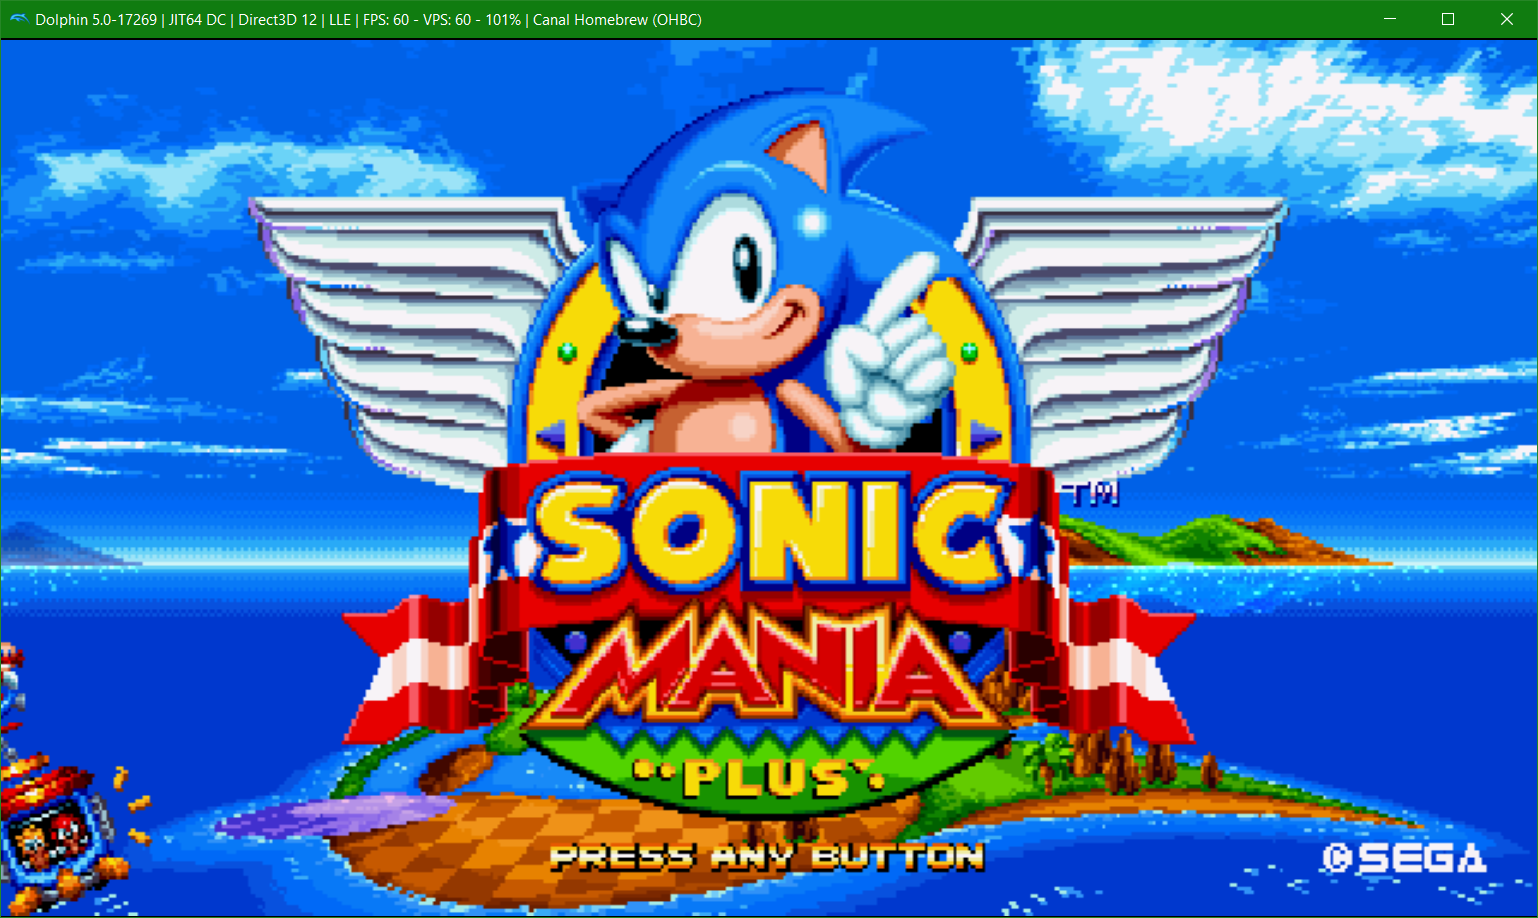 Sonic Mania and Sonic Plus (SAGE ANNOUNCEMENT) [Sonic Mania] [Mods]